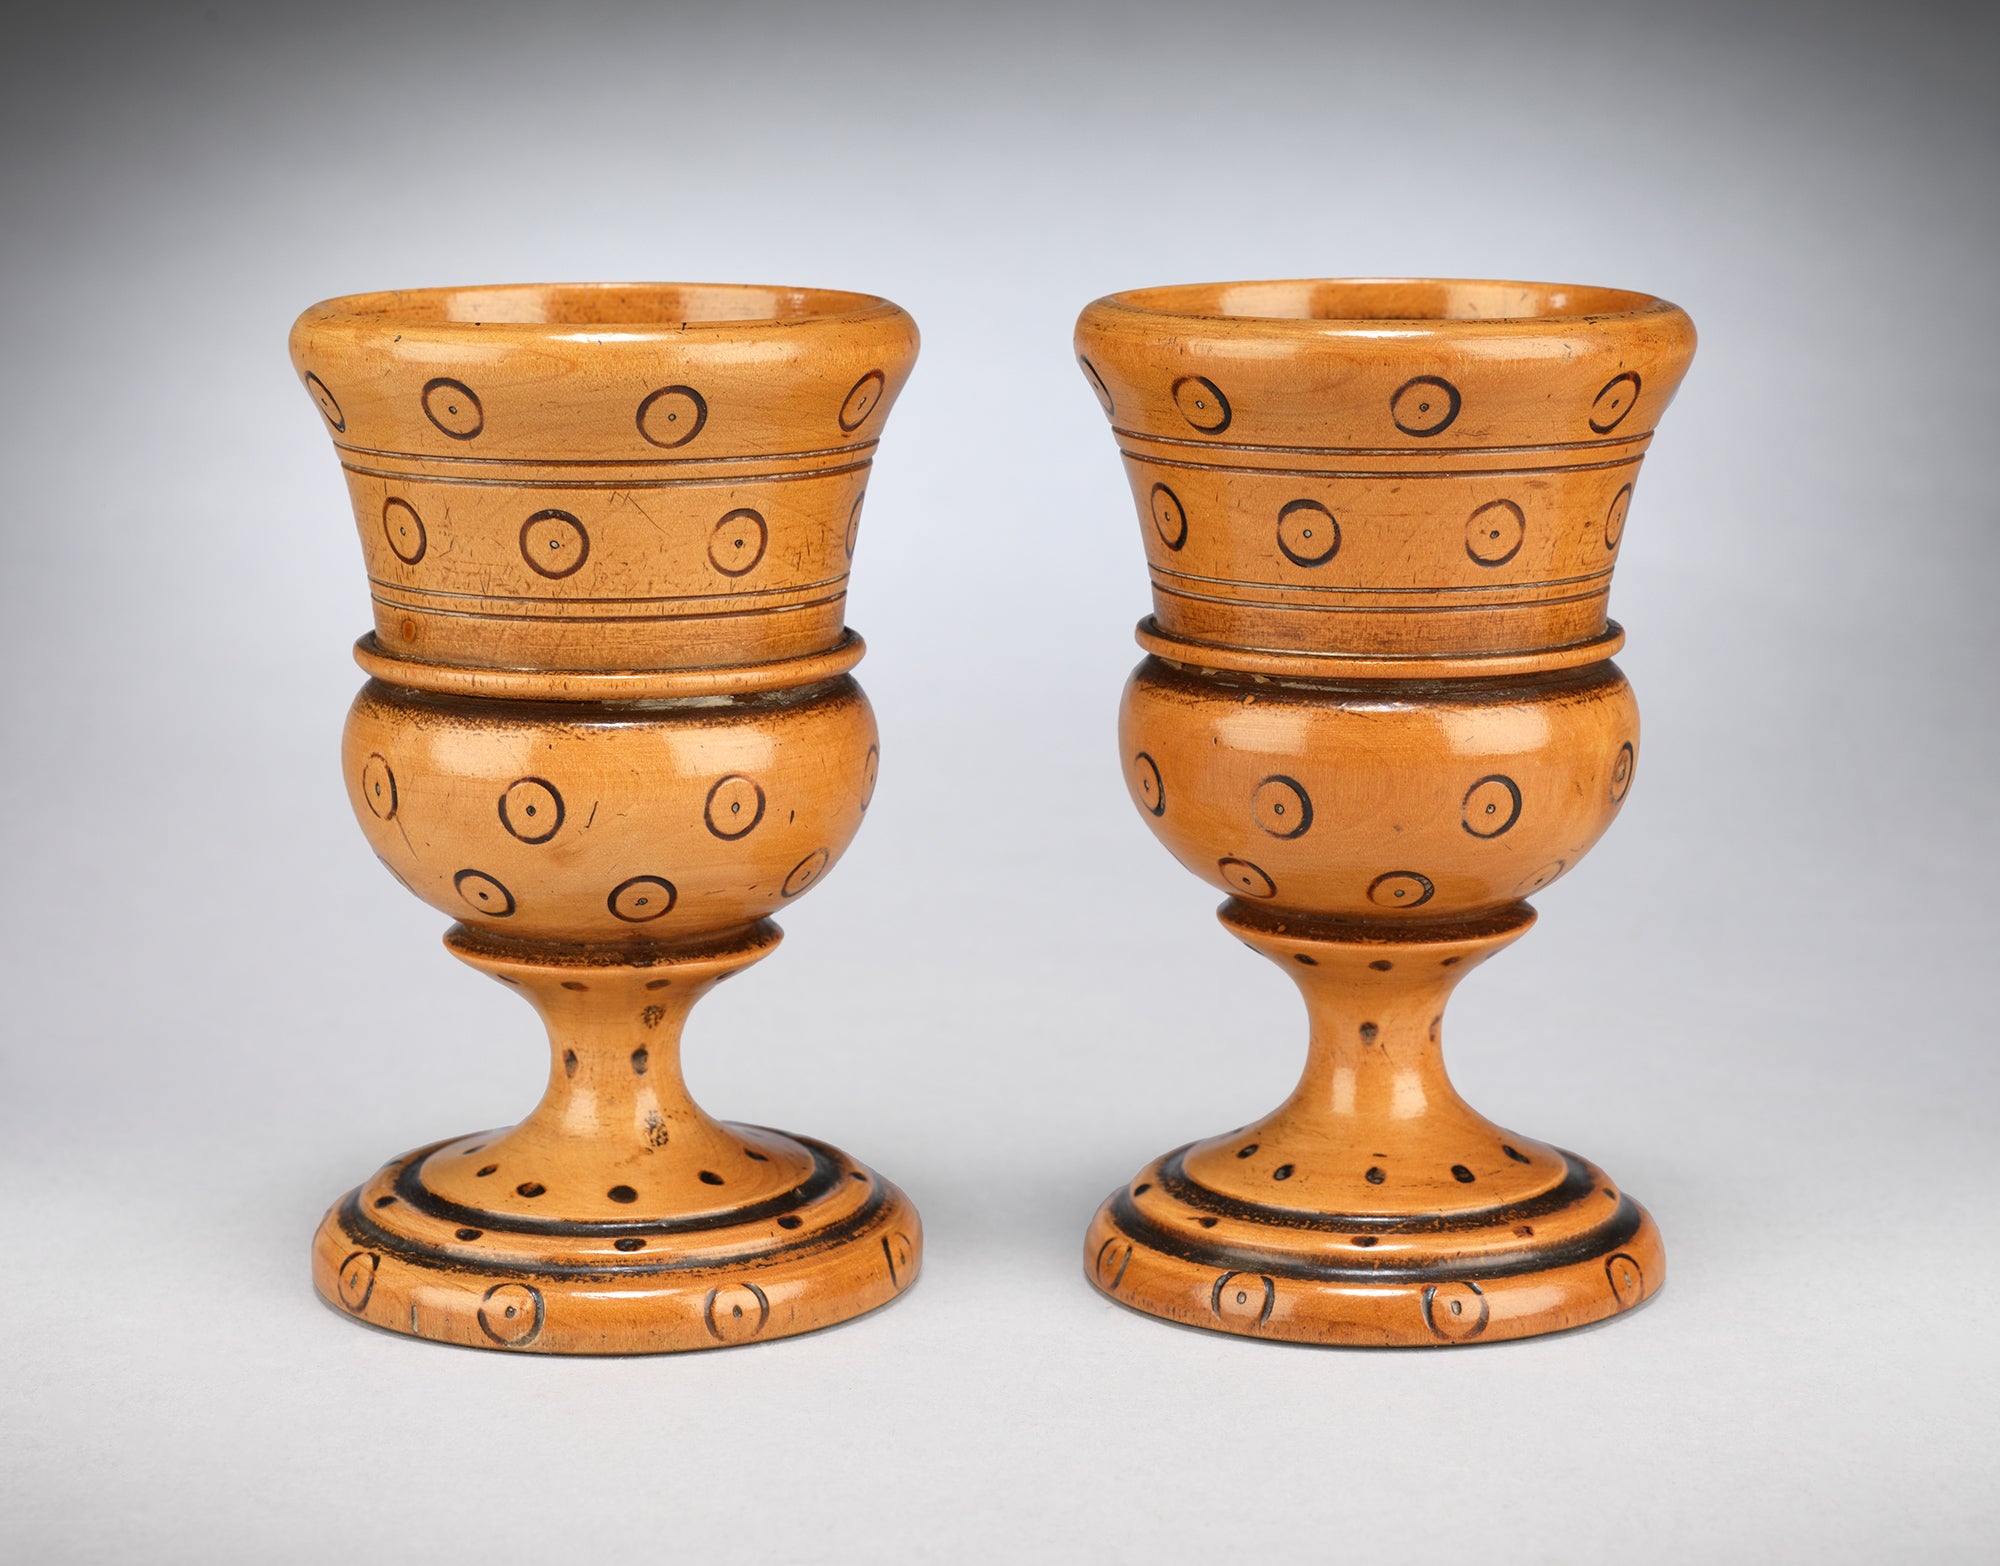 A Rare Pair of Roundel Decorated Treen Vessels